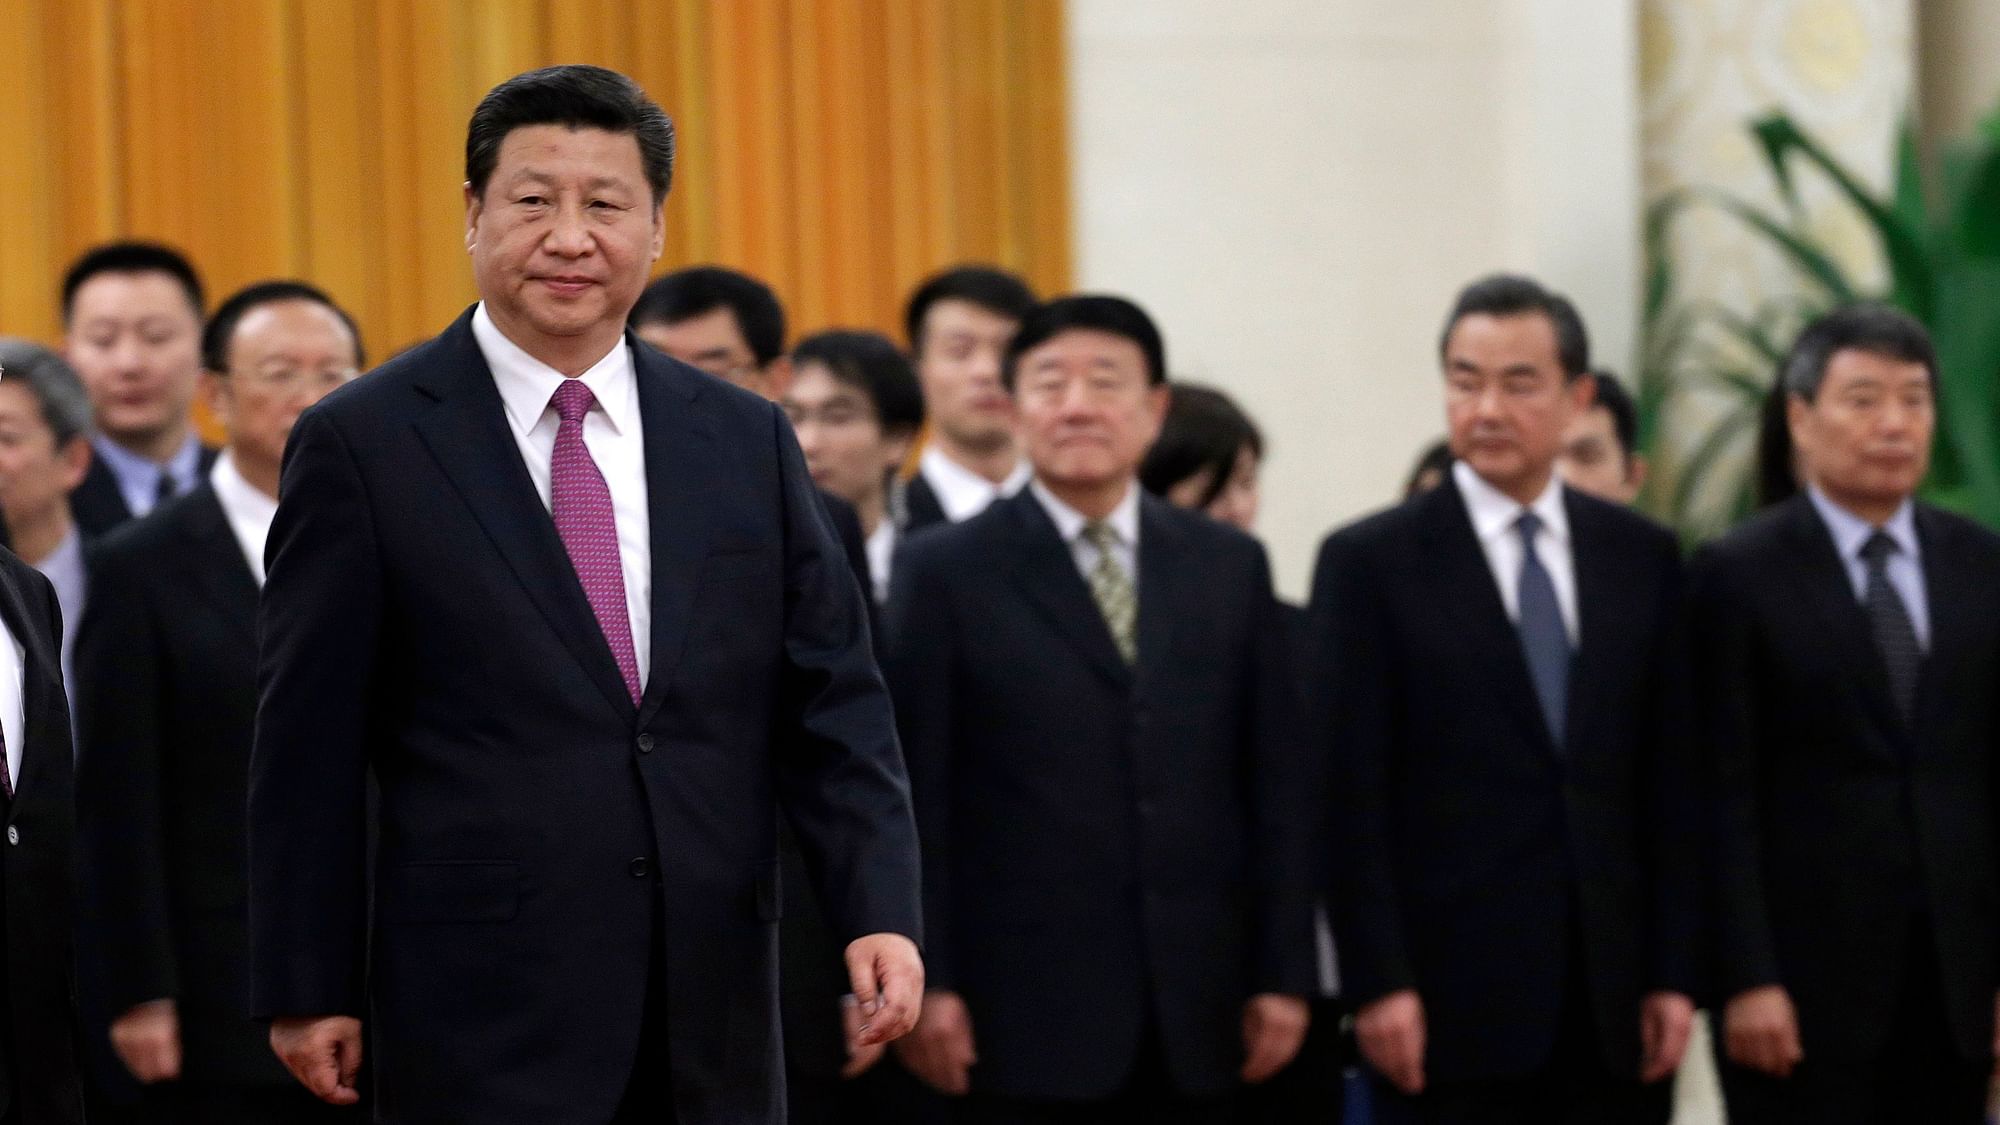 File photo of China’s President Xi Jinping in front of Chinese senior officials during a welcoming ceremony at the Great Hall of the People in Beijing.